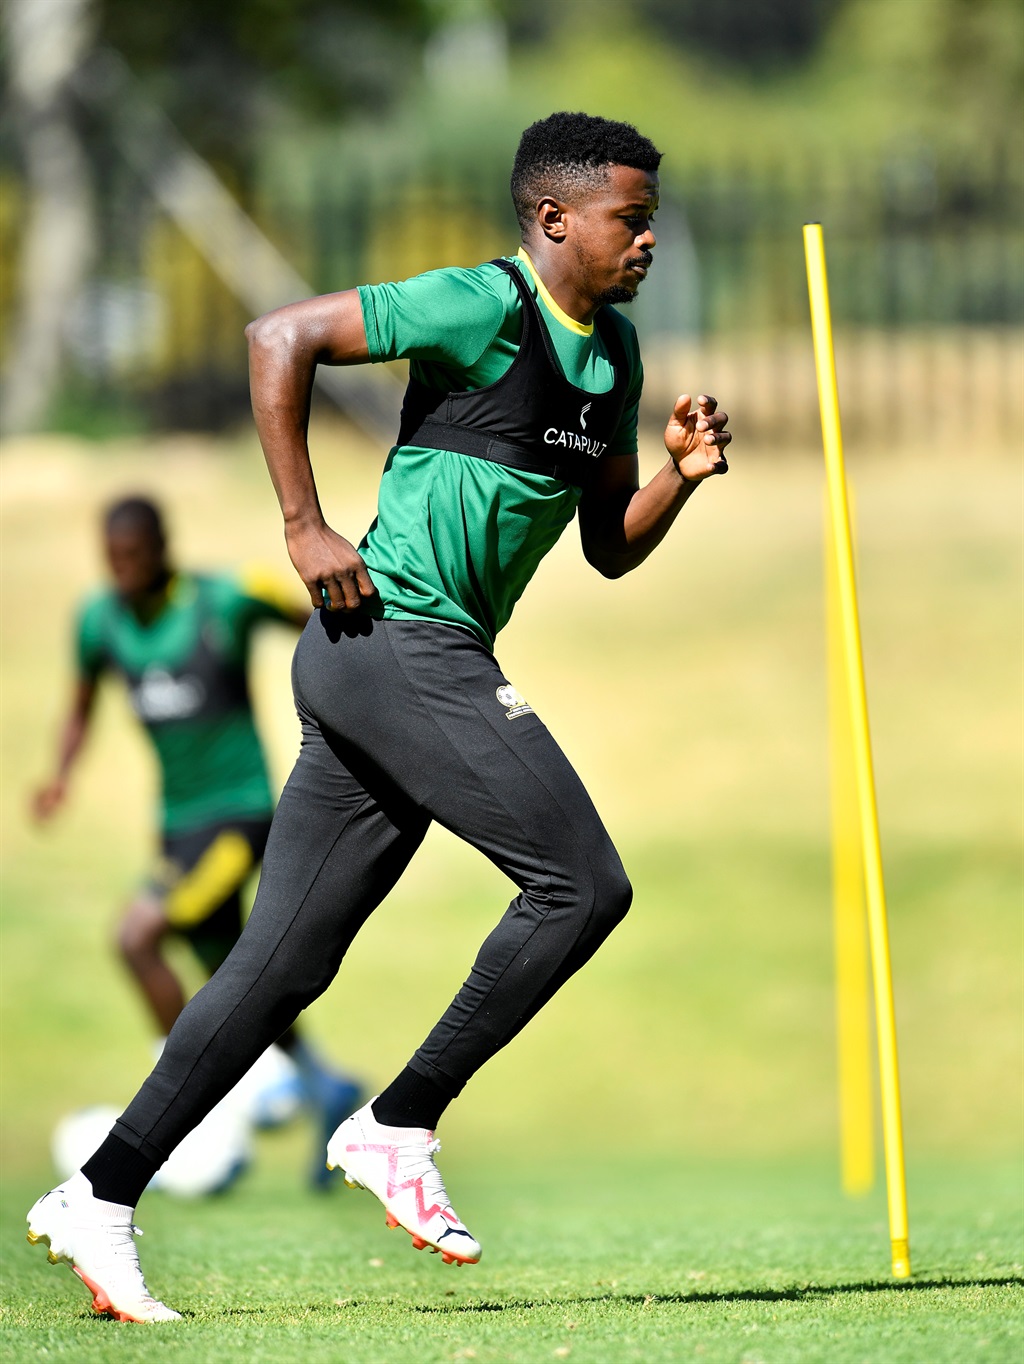 STELLENBOCH, SOUTH AFRICA - JANAURY 08: Teboho Mokoena during the South Africa national mens soccer team media open day at Lentelus Sportsground on January 08, 2023 in Stellenbosch, South Africa. (Photo by Ashley Vlotman/Gallo Images)